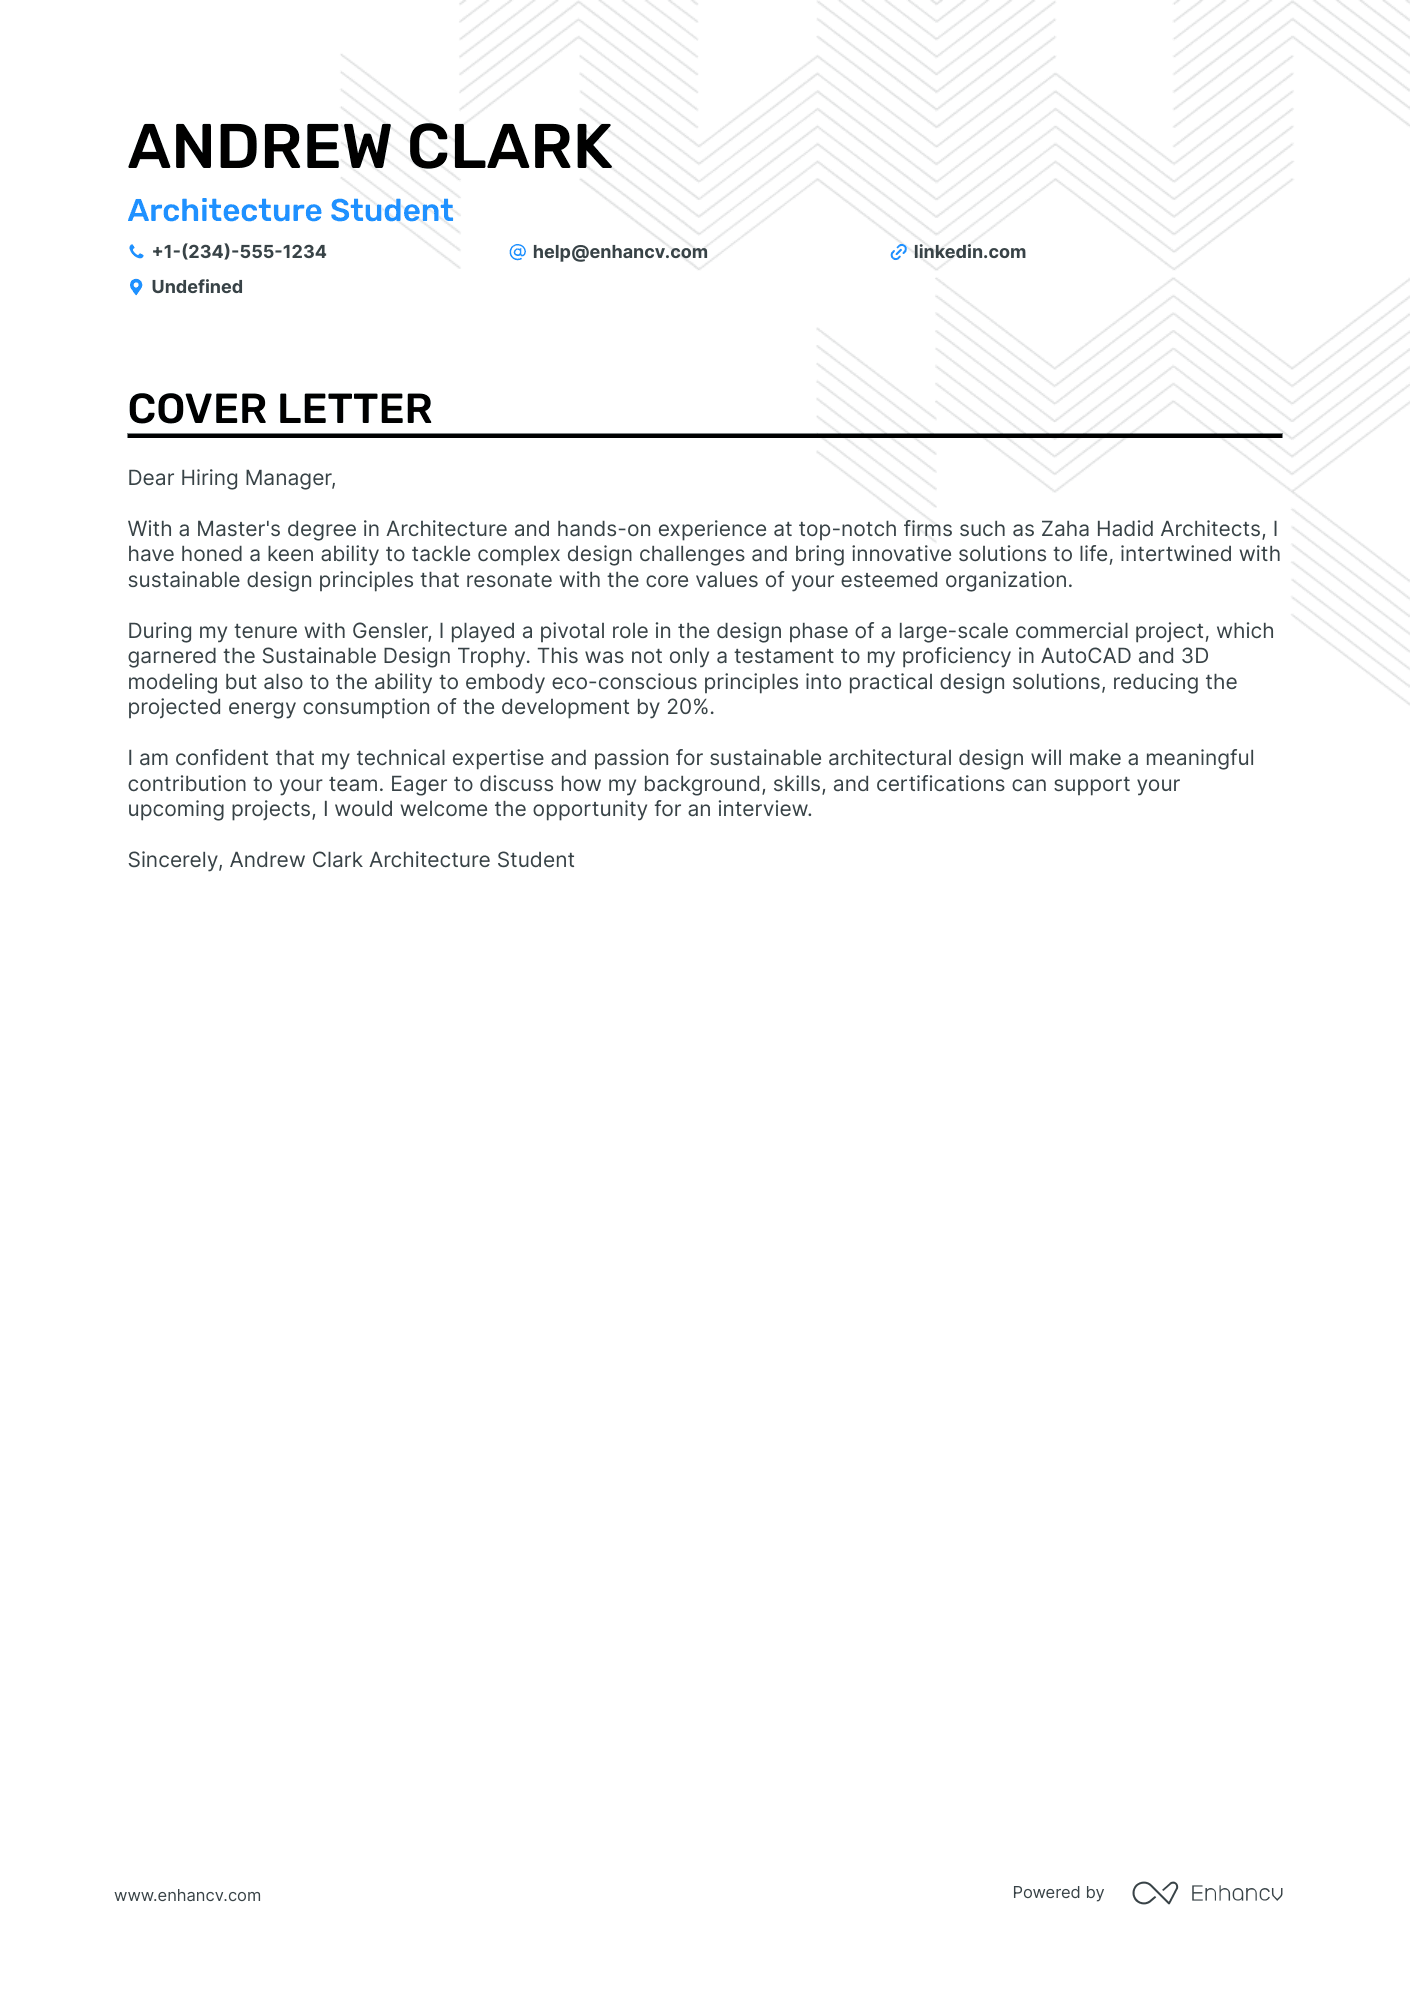 Architecture Student cover letter